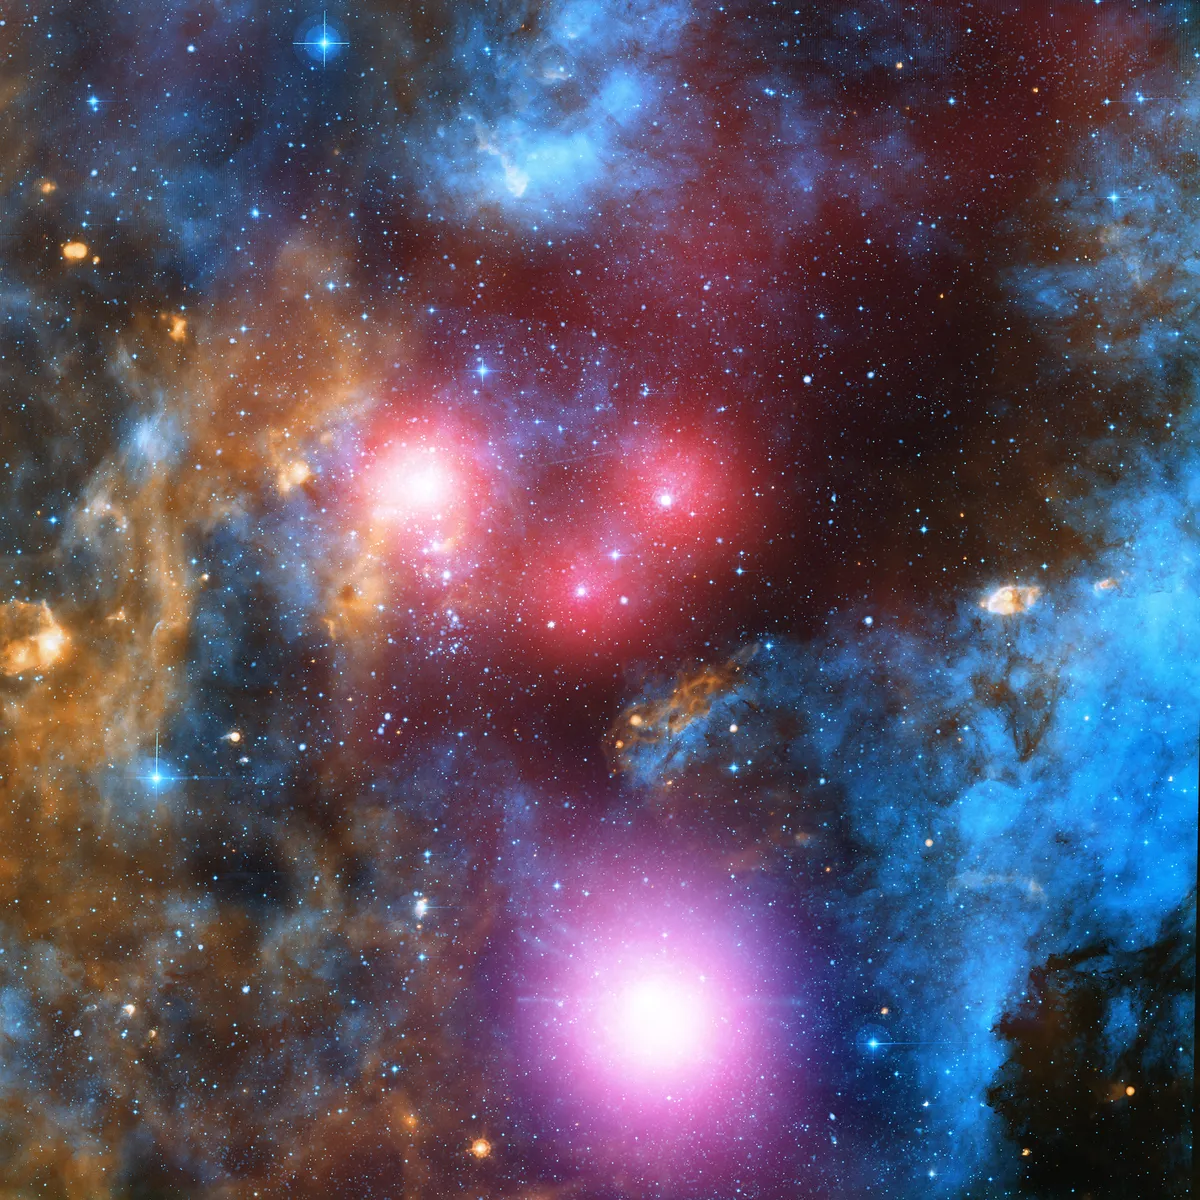 Cygnus OB2 This region contains massive stars - even more massive than our Sun - that shoot high-energy stellar winds into the surrounding area, hitting cosmic gas and dust and generating vast amounts of energy that Chandra can detect in X-ray. Credit: X-ray: NASA/CXC/SAO/J. Drake et al; Optical:Univ. of Hertfordshire/INT/IPHAS; Infrared: NASA/JPL-Caltech/Spitzer